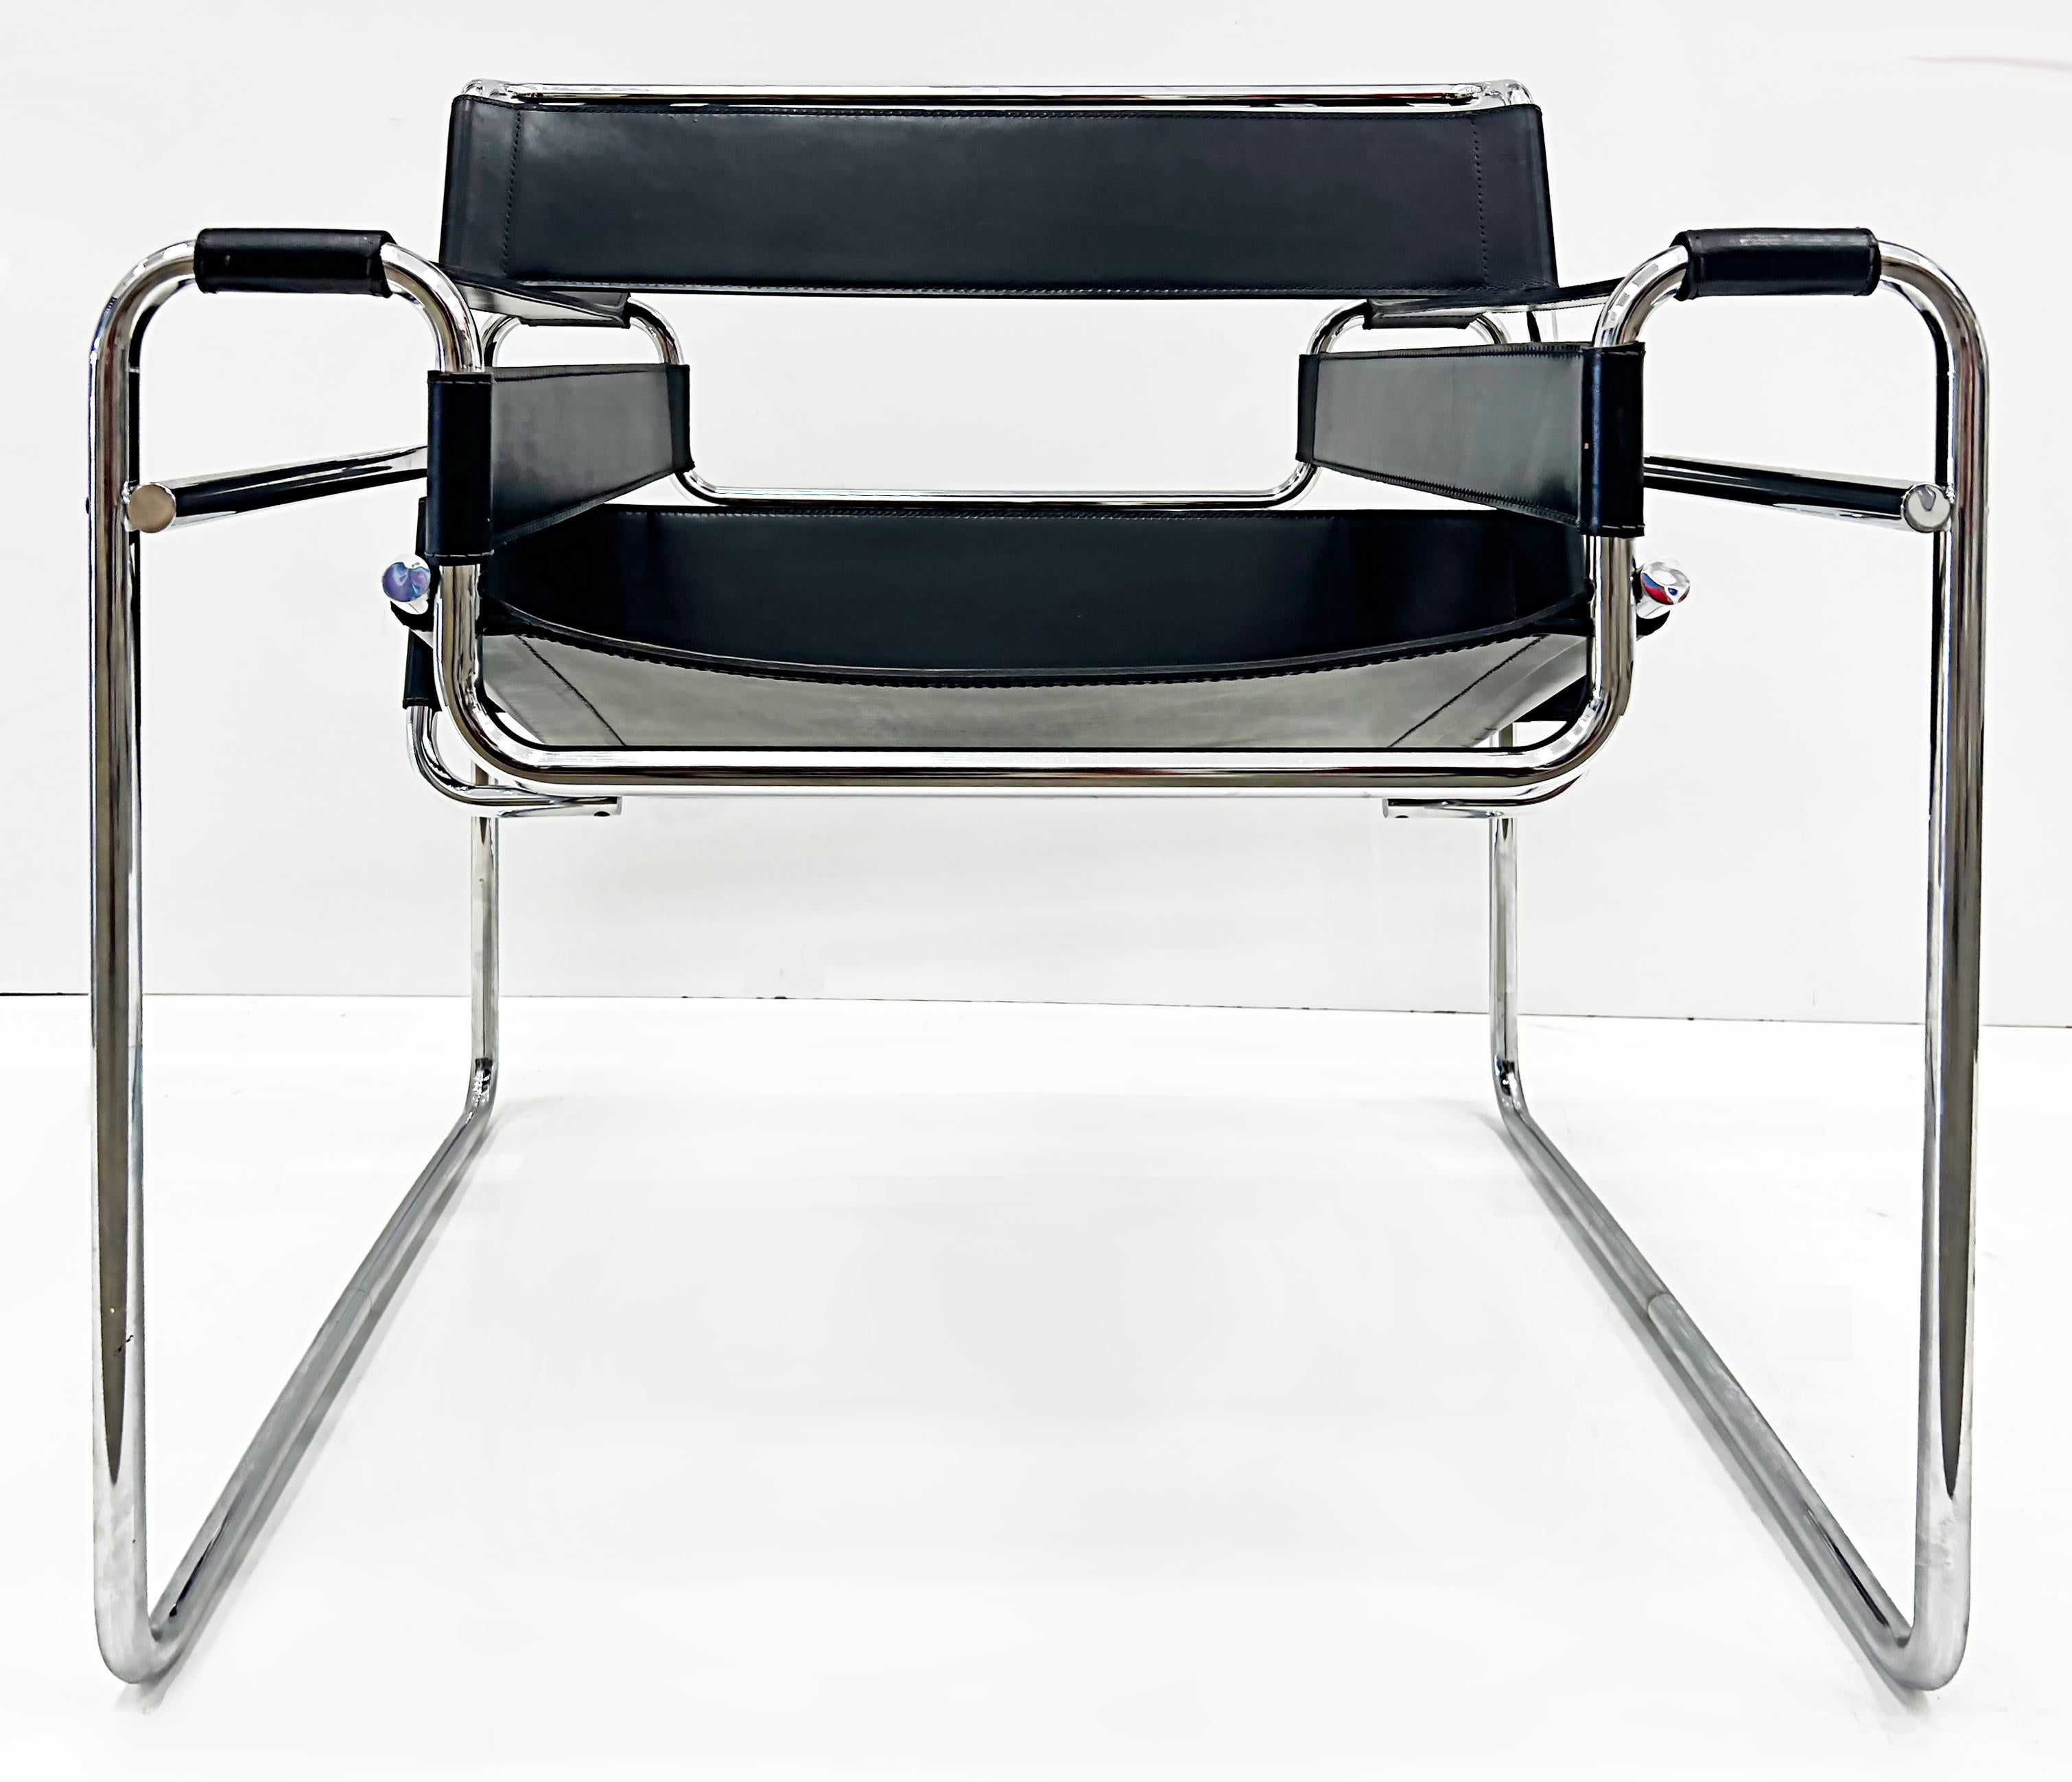 Vintage Marcel Breuer Knoll Wassily chair in black leather, 1970s.

Offered for sale is an original vintage circa 1970s Wassily Chair by Marcel Breuer for Knoll. This iconic chair is done in black leather and chrome that is in great vintage